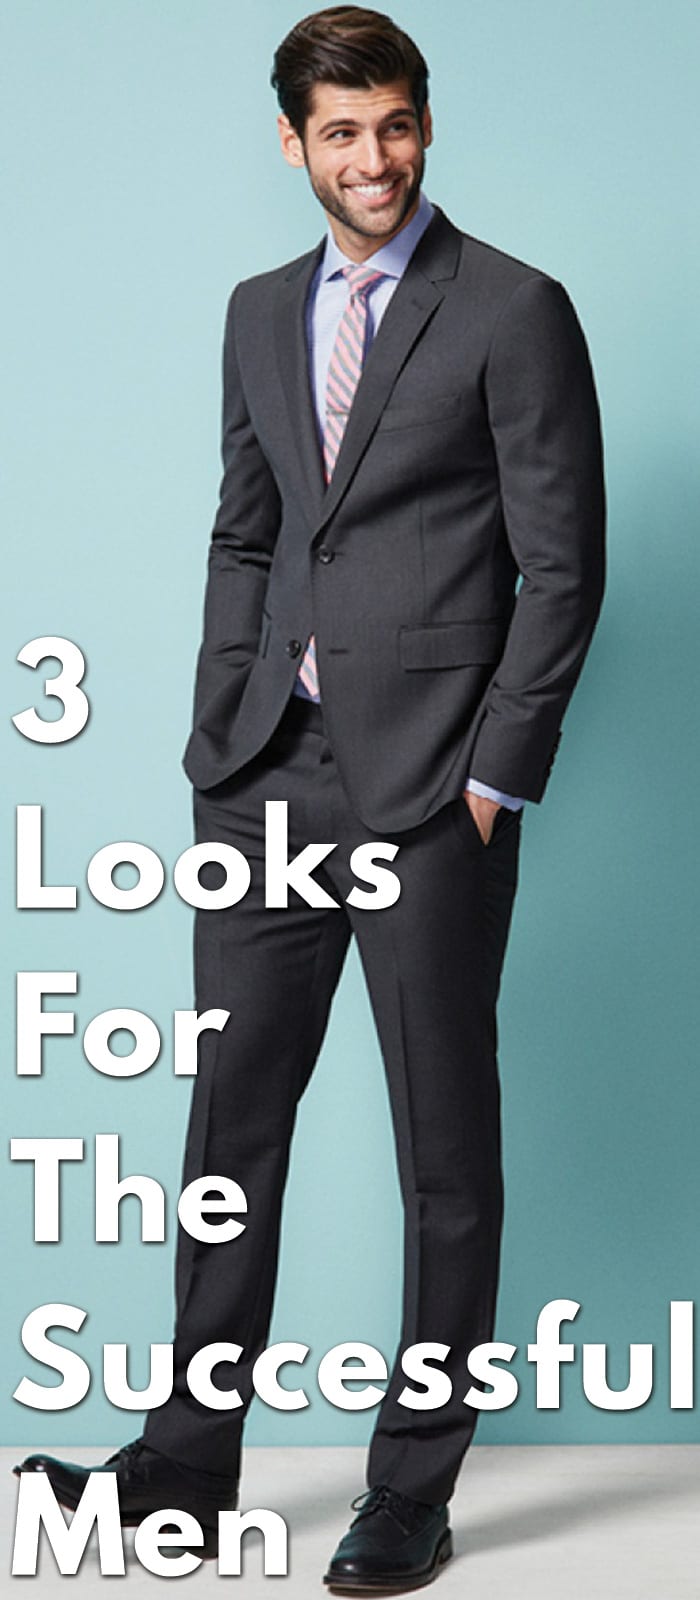 3 Looks For The Successful Men